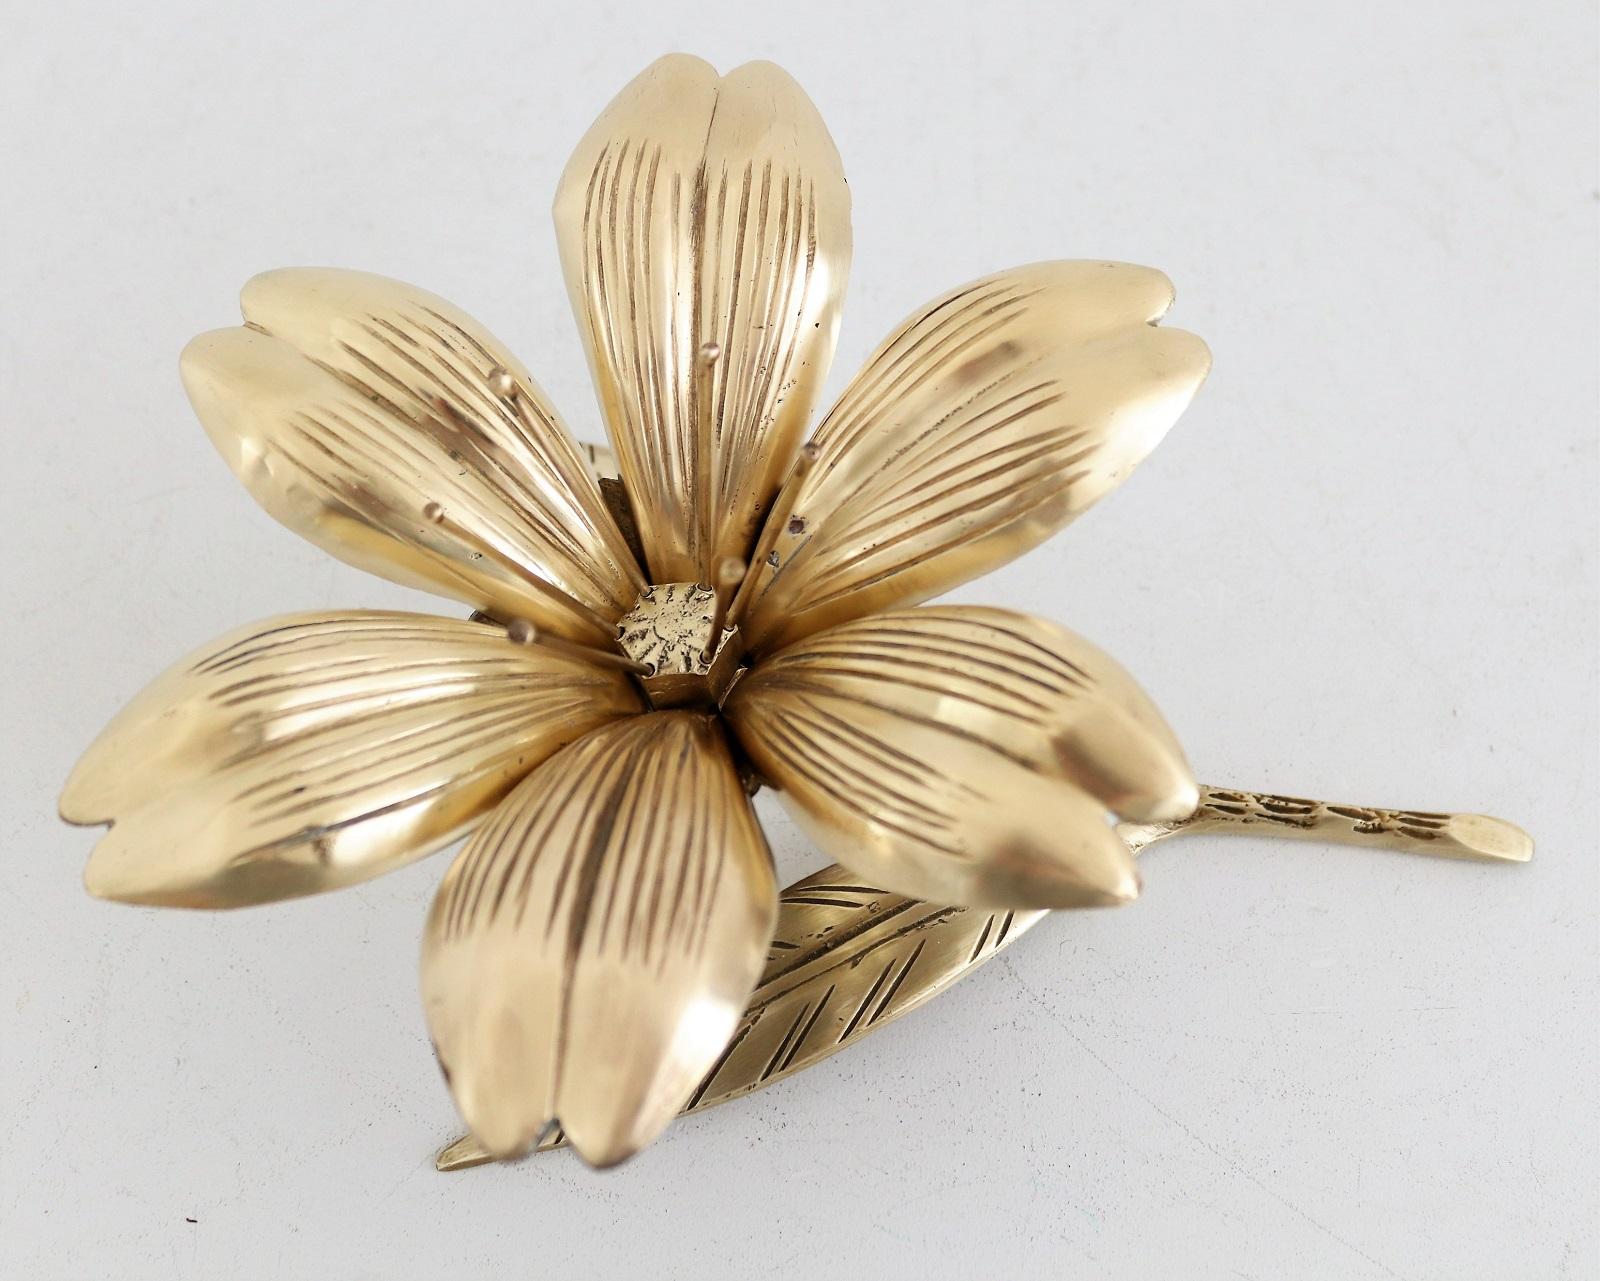 Italian Midcentury Flower in Brass with Petal Ashtrays for Cigarettes, 1950s 11